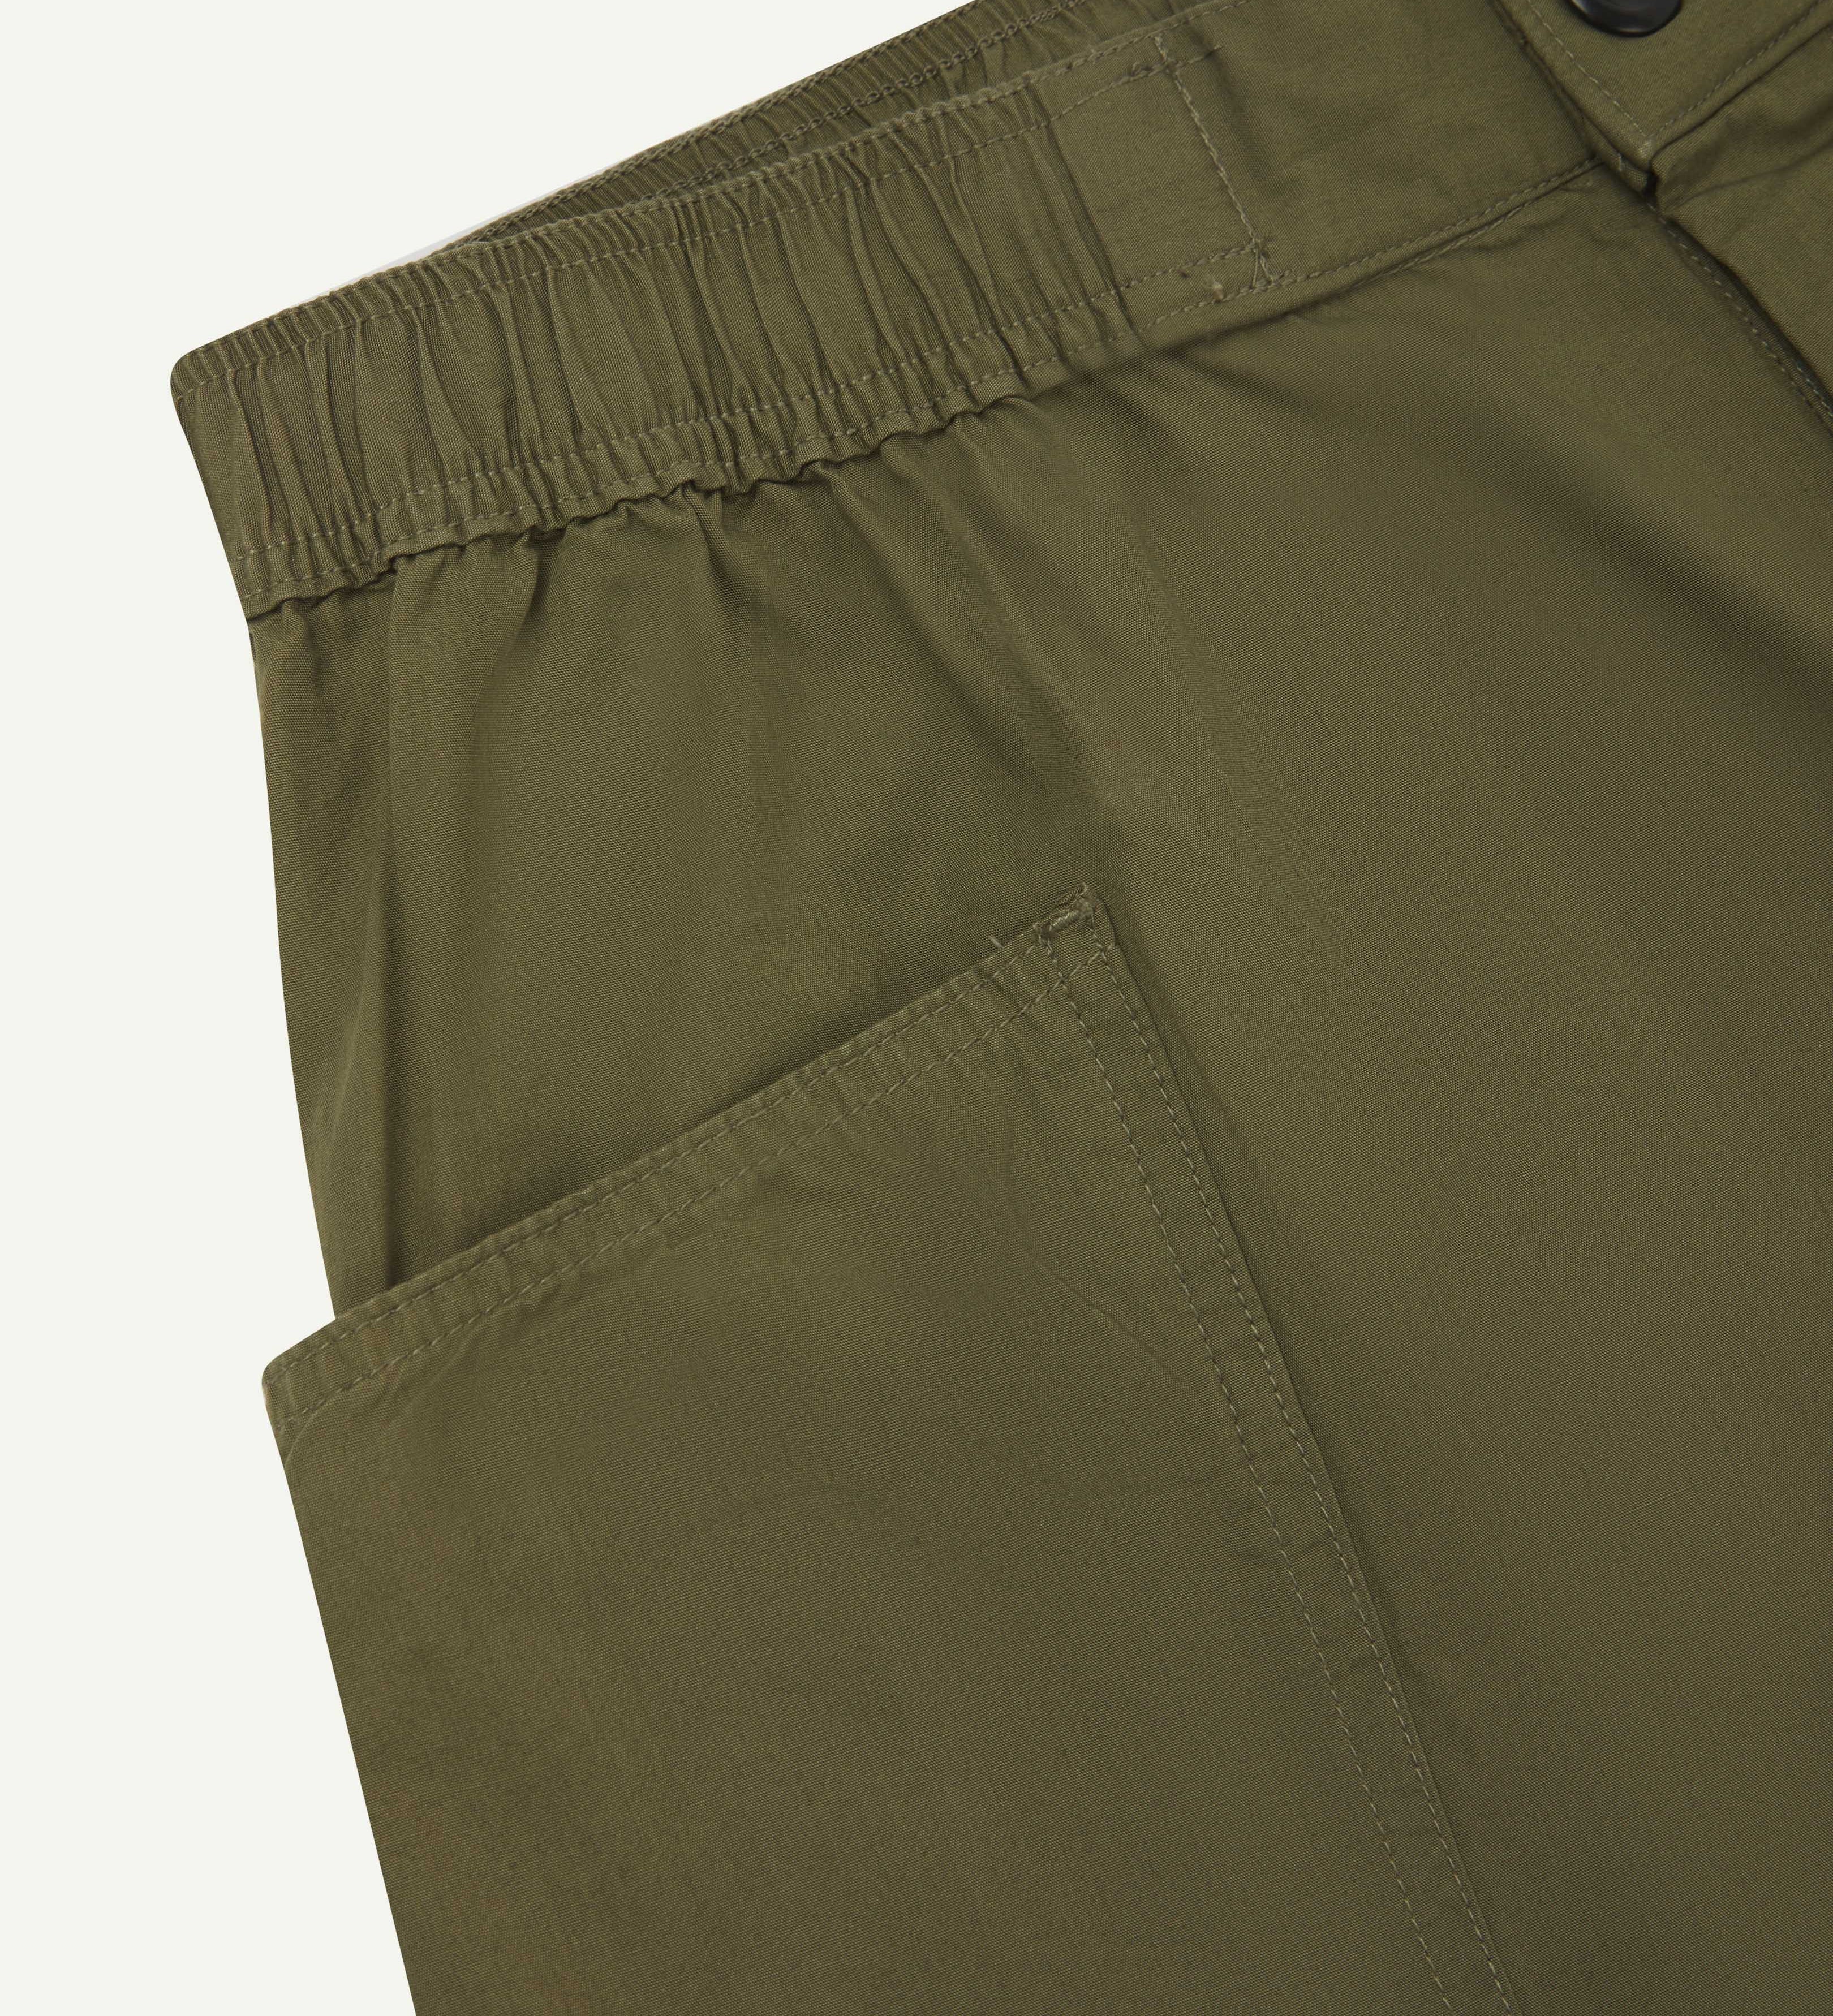 Close-up view of olive green organic cotton #5015 lightweight cotton shorts by Uskees showing elasticated waist and deep front pocket.